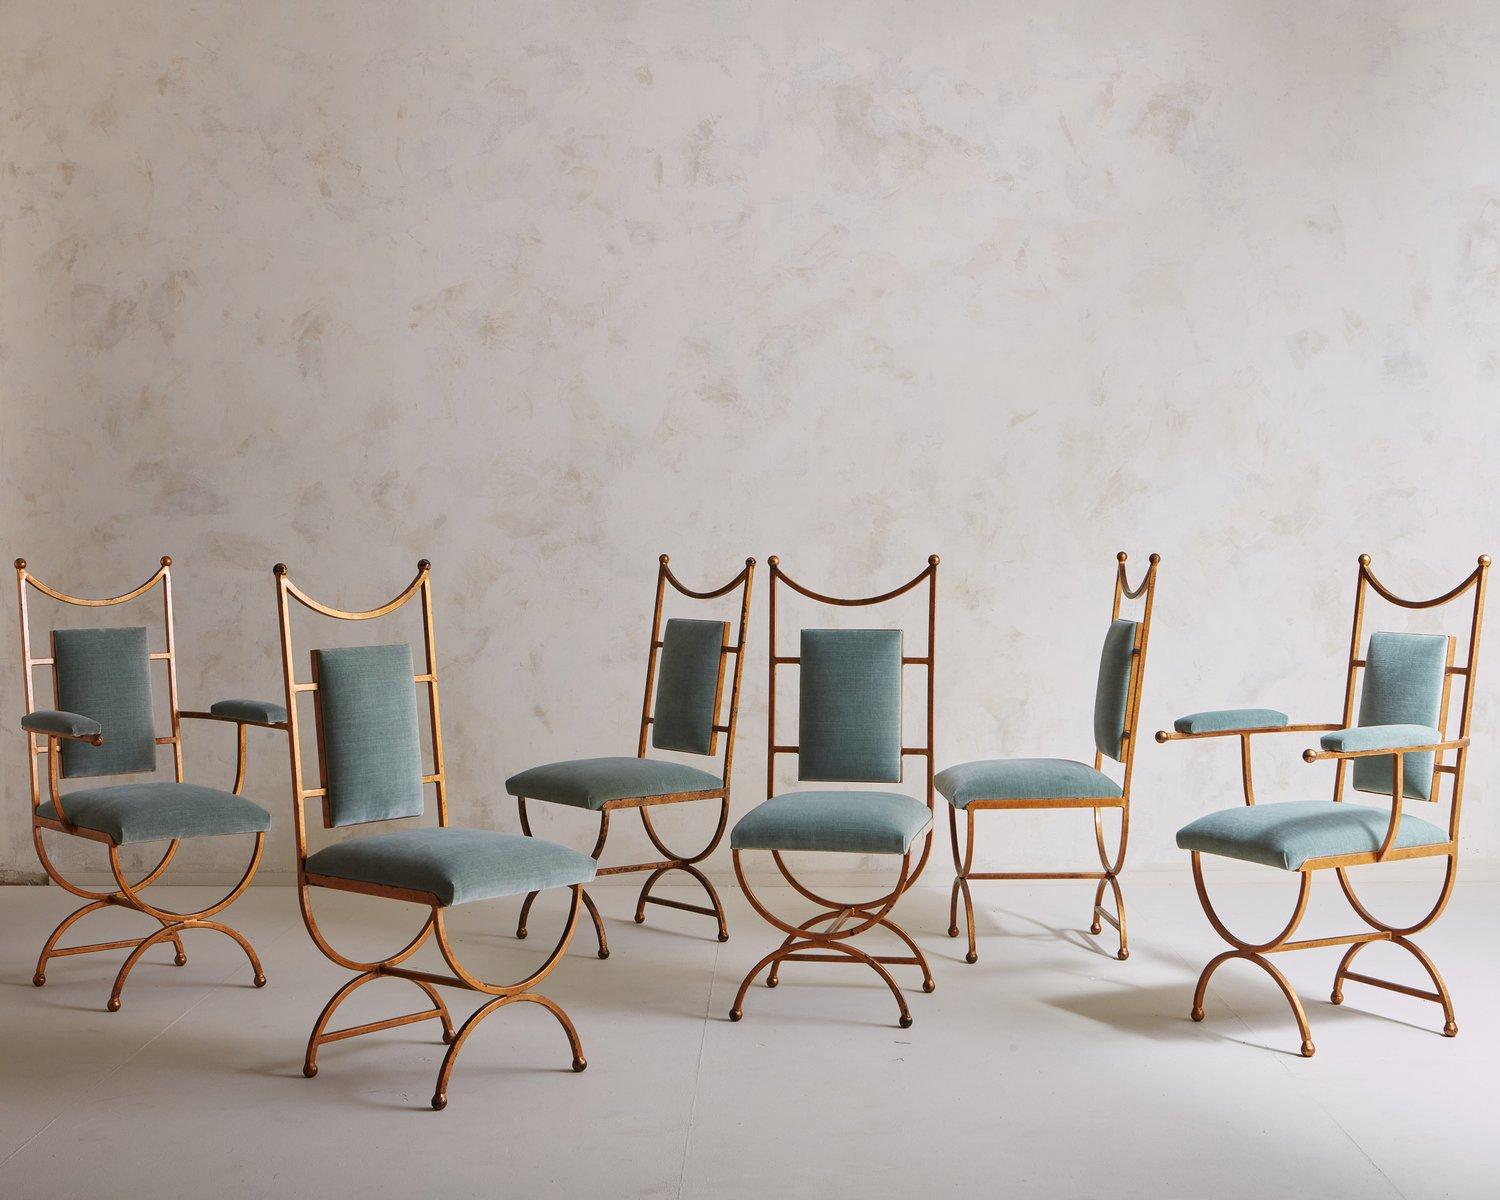 French Set of 6 Gold Dining Chairs in Seafoam Green Velvet, France 20th Century